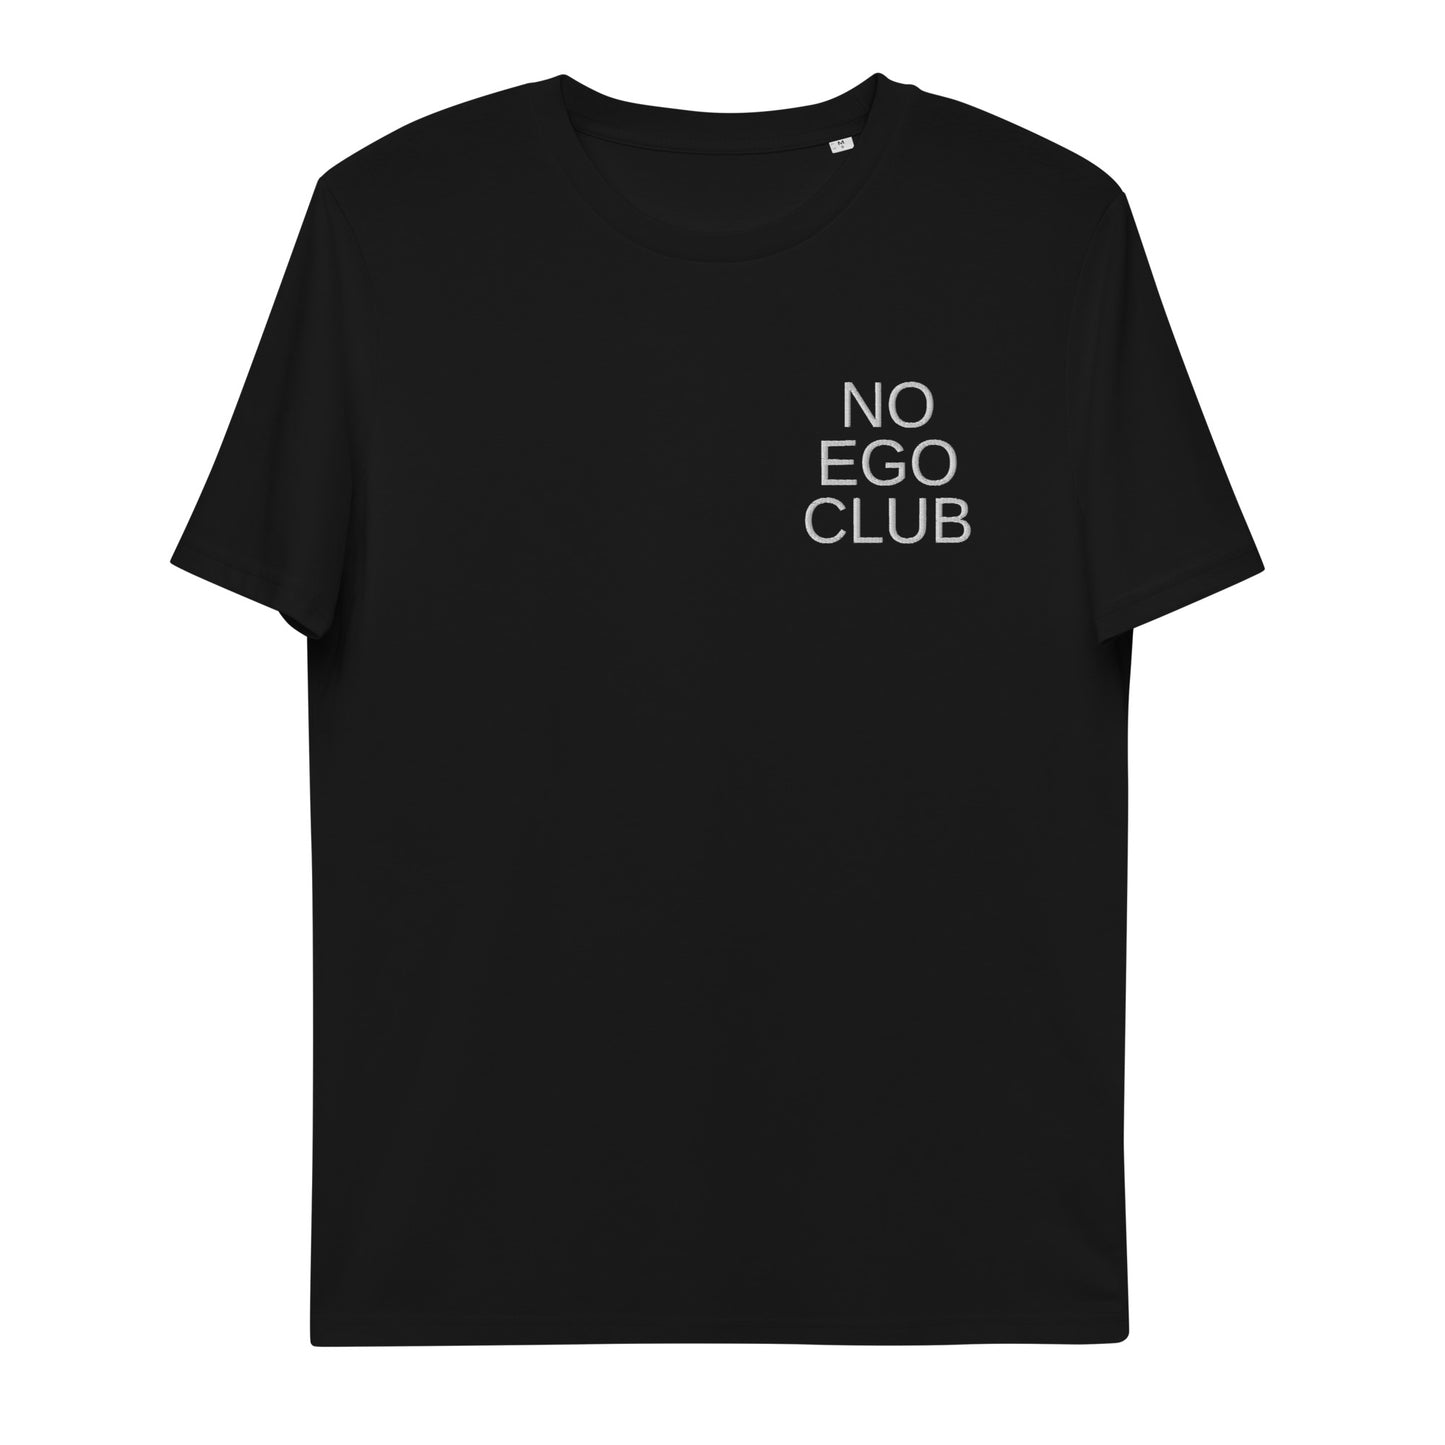 No Ego Club t-shirt black and unisex. Clothes With Words apparel.